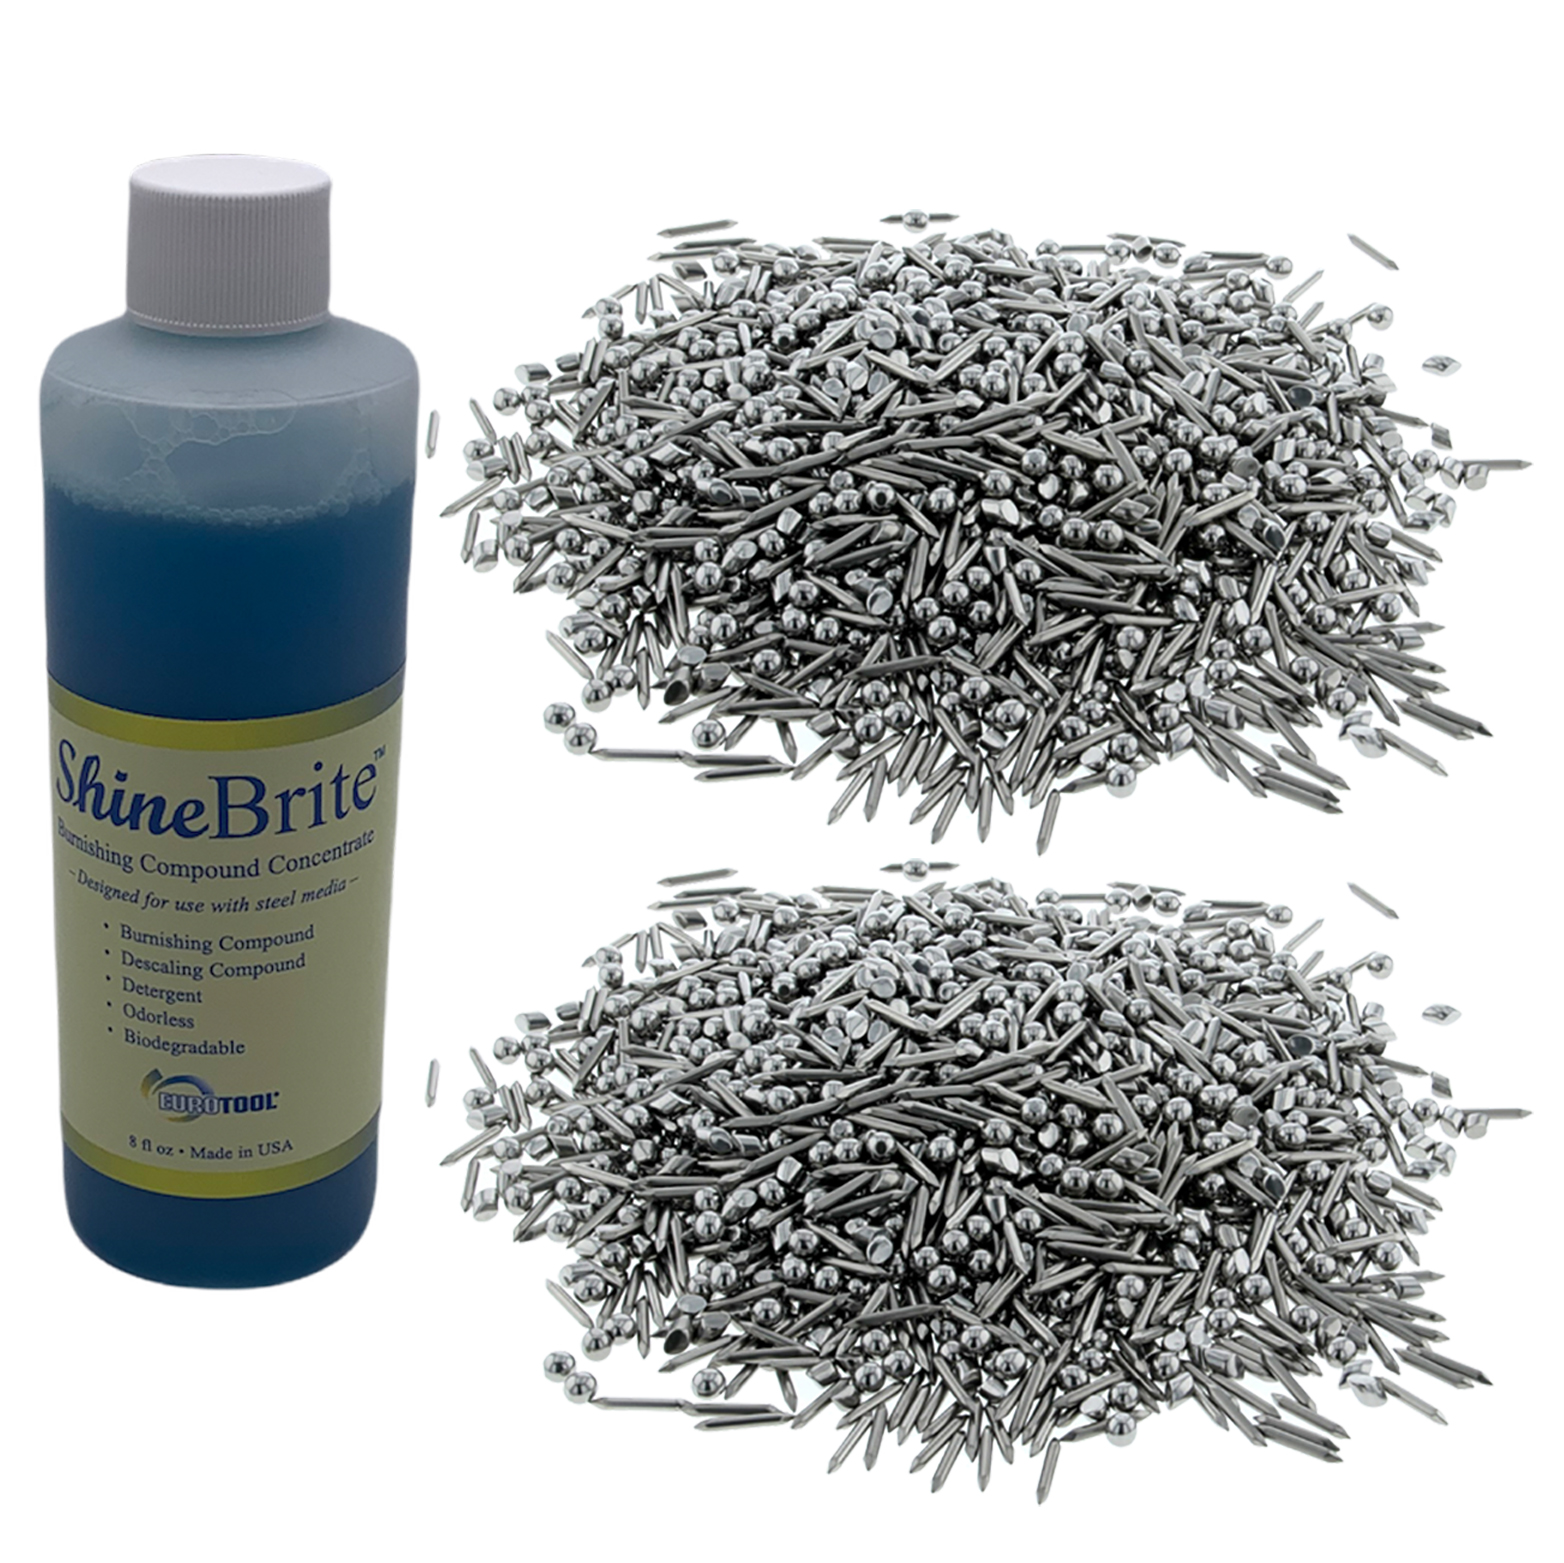 Shinebrite Silver Dip Cleaner 1 Gallon Jewelry Silver Metal